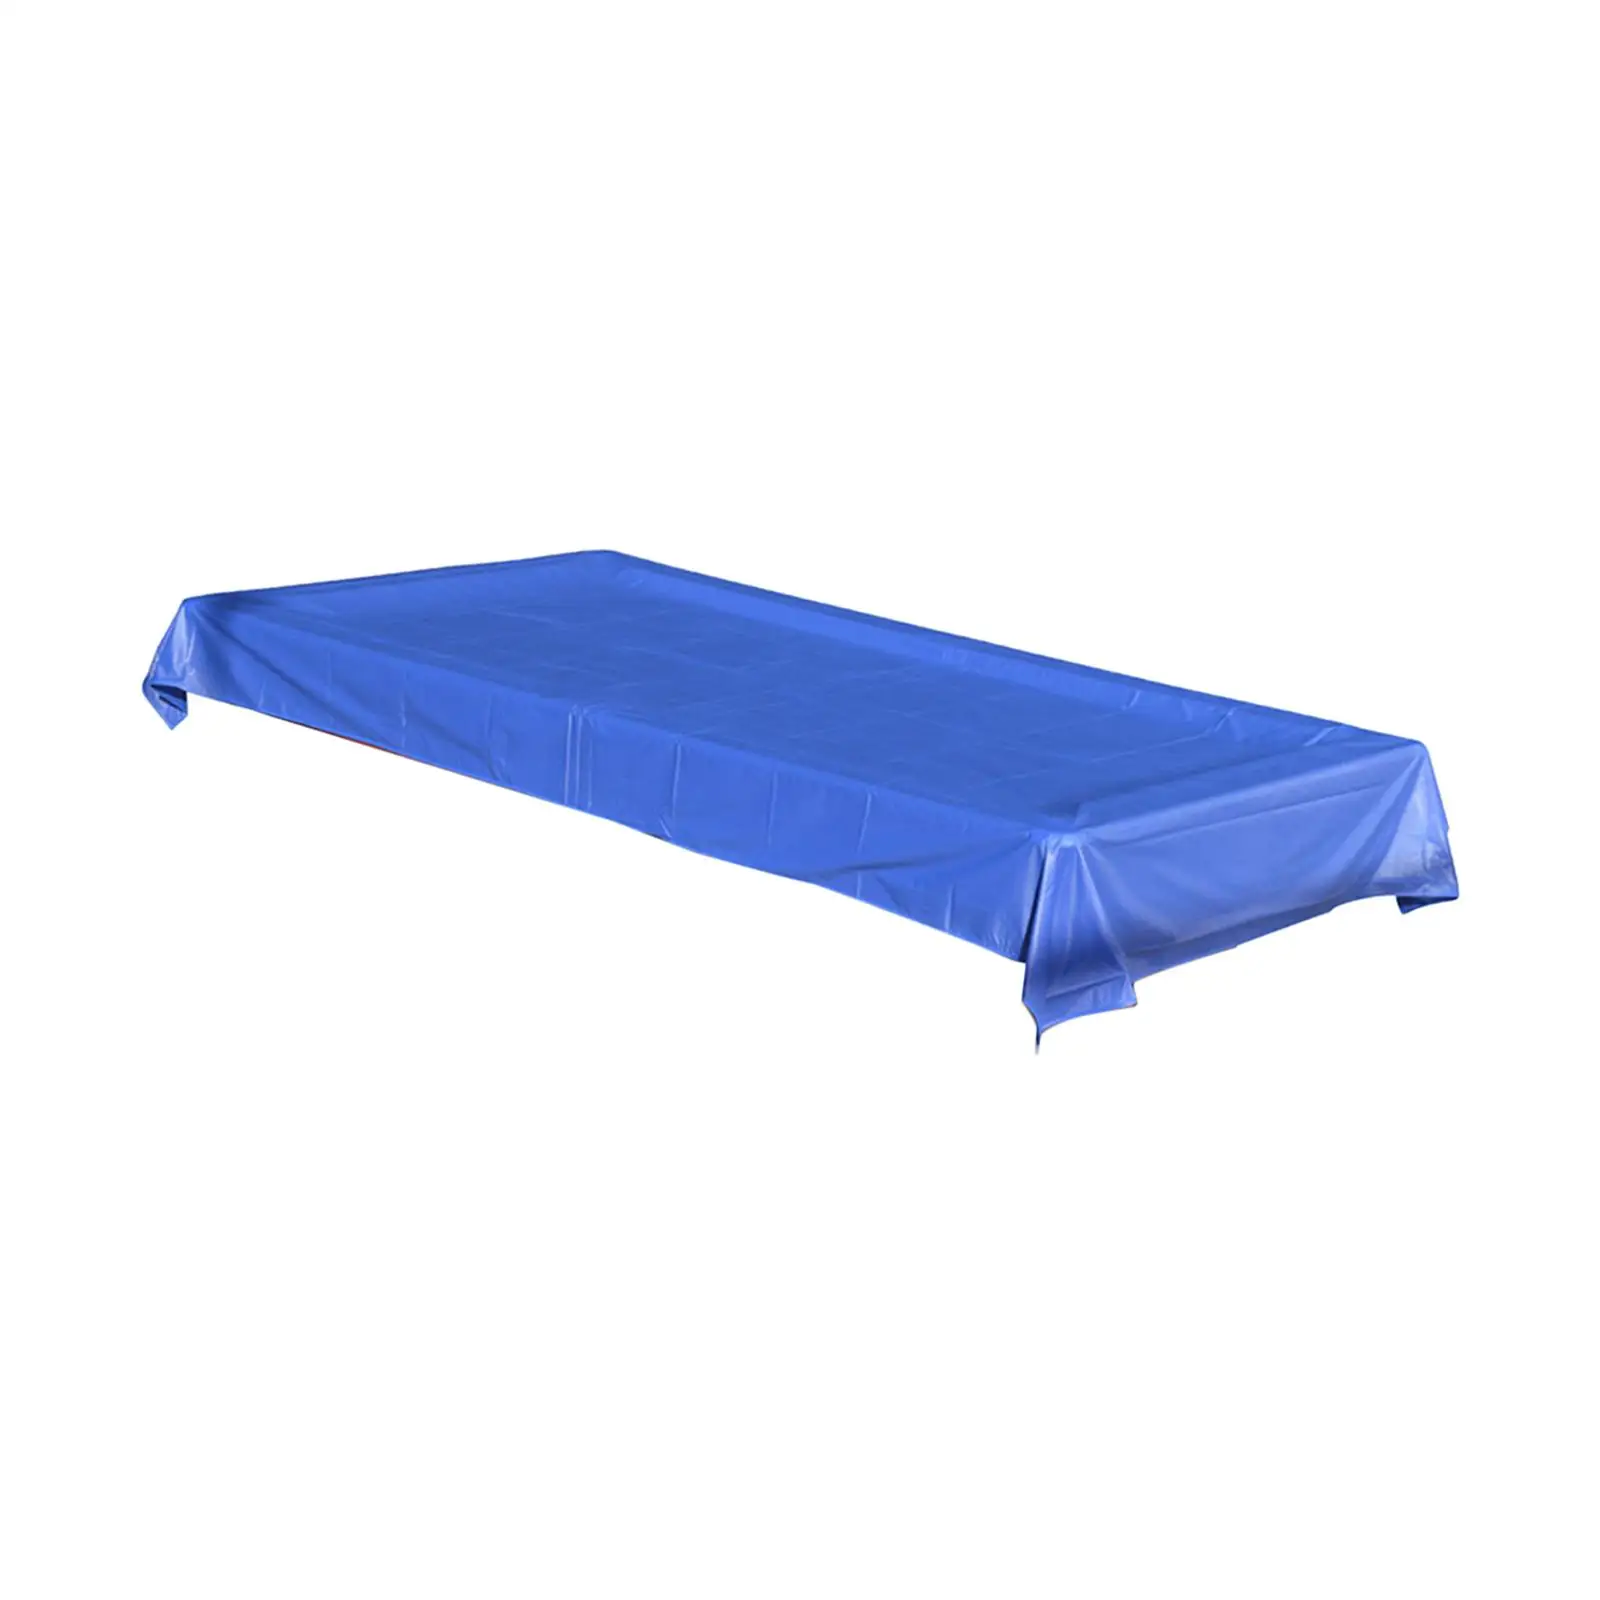 Pool Table Cover 8 ft Waterproof Heavy Duty Dustproof Portable for Entertainment